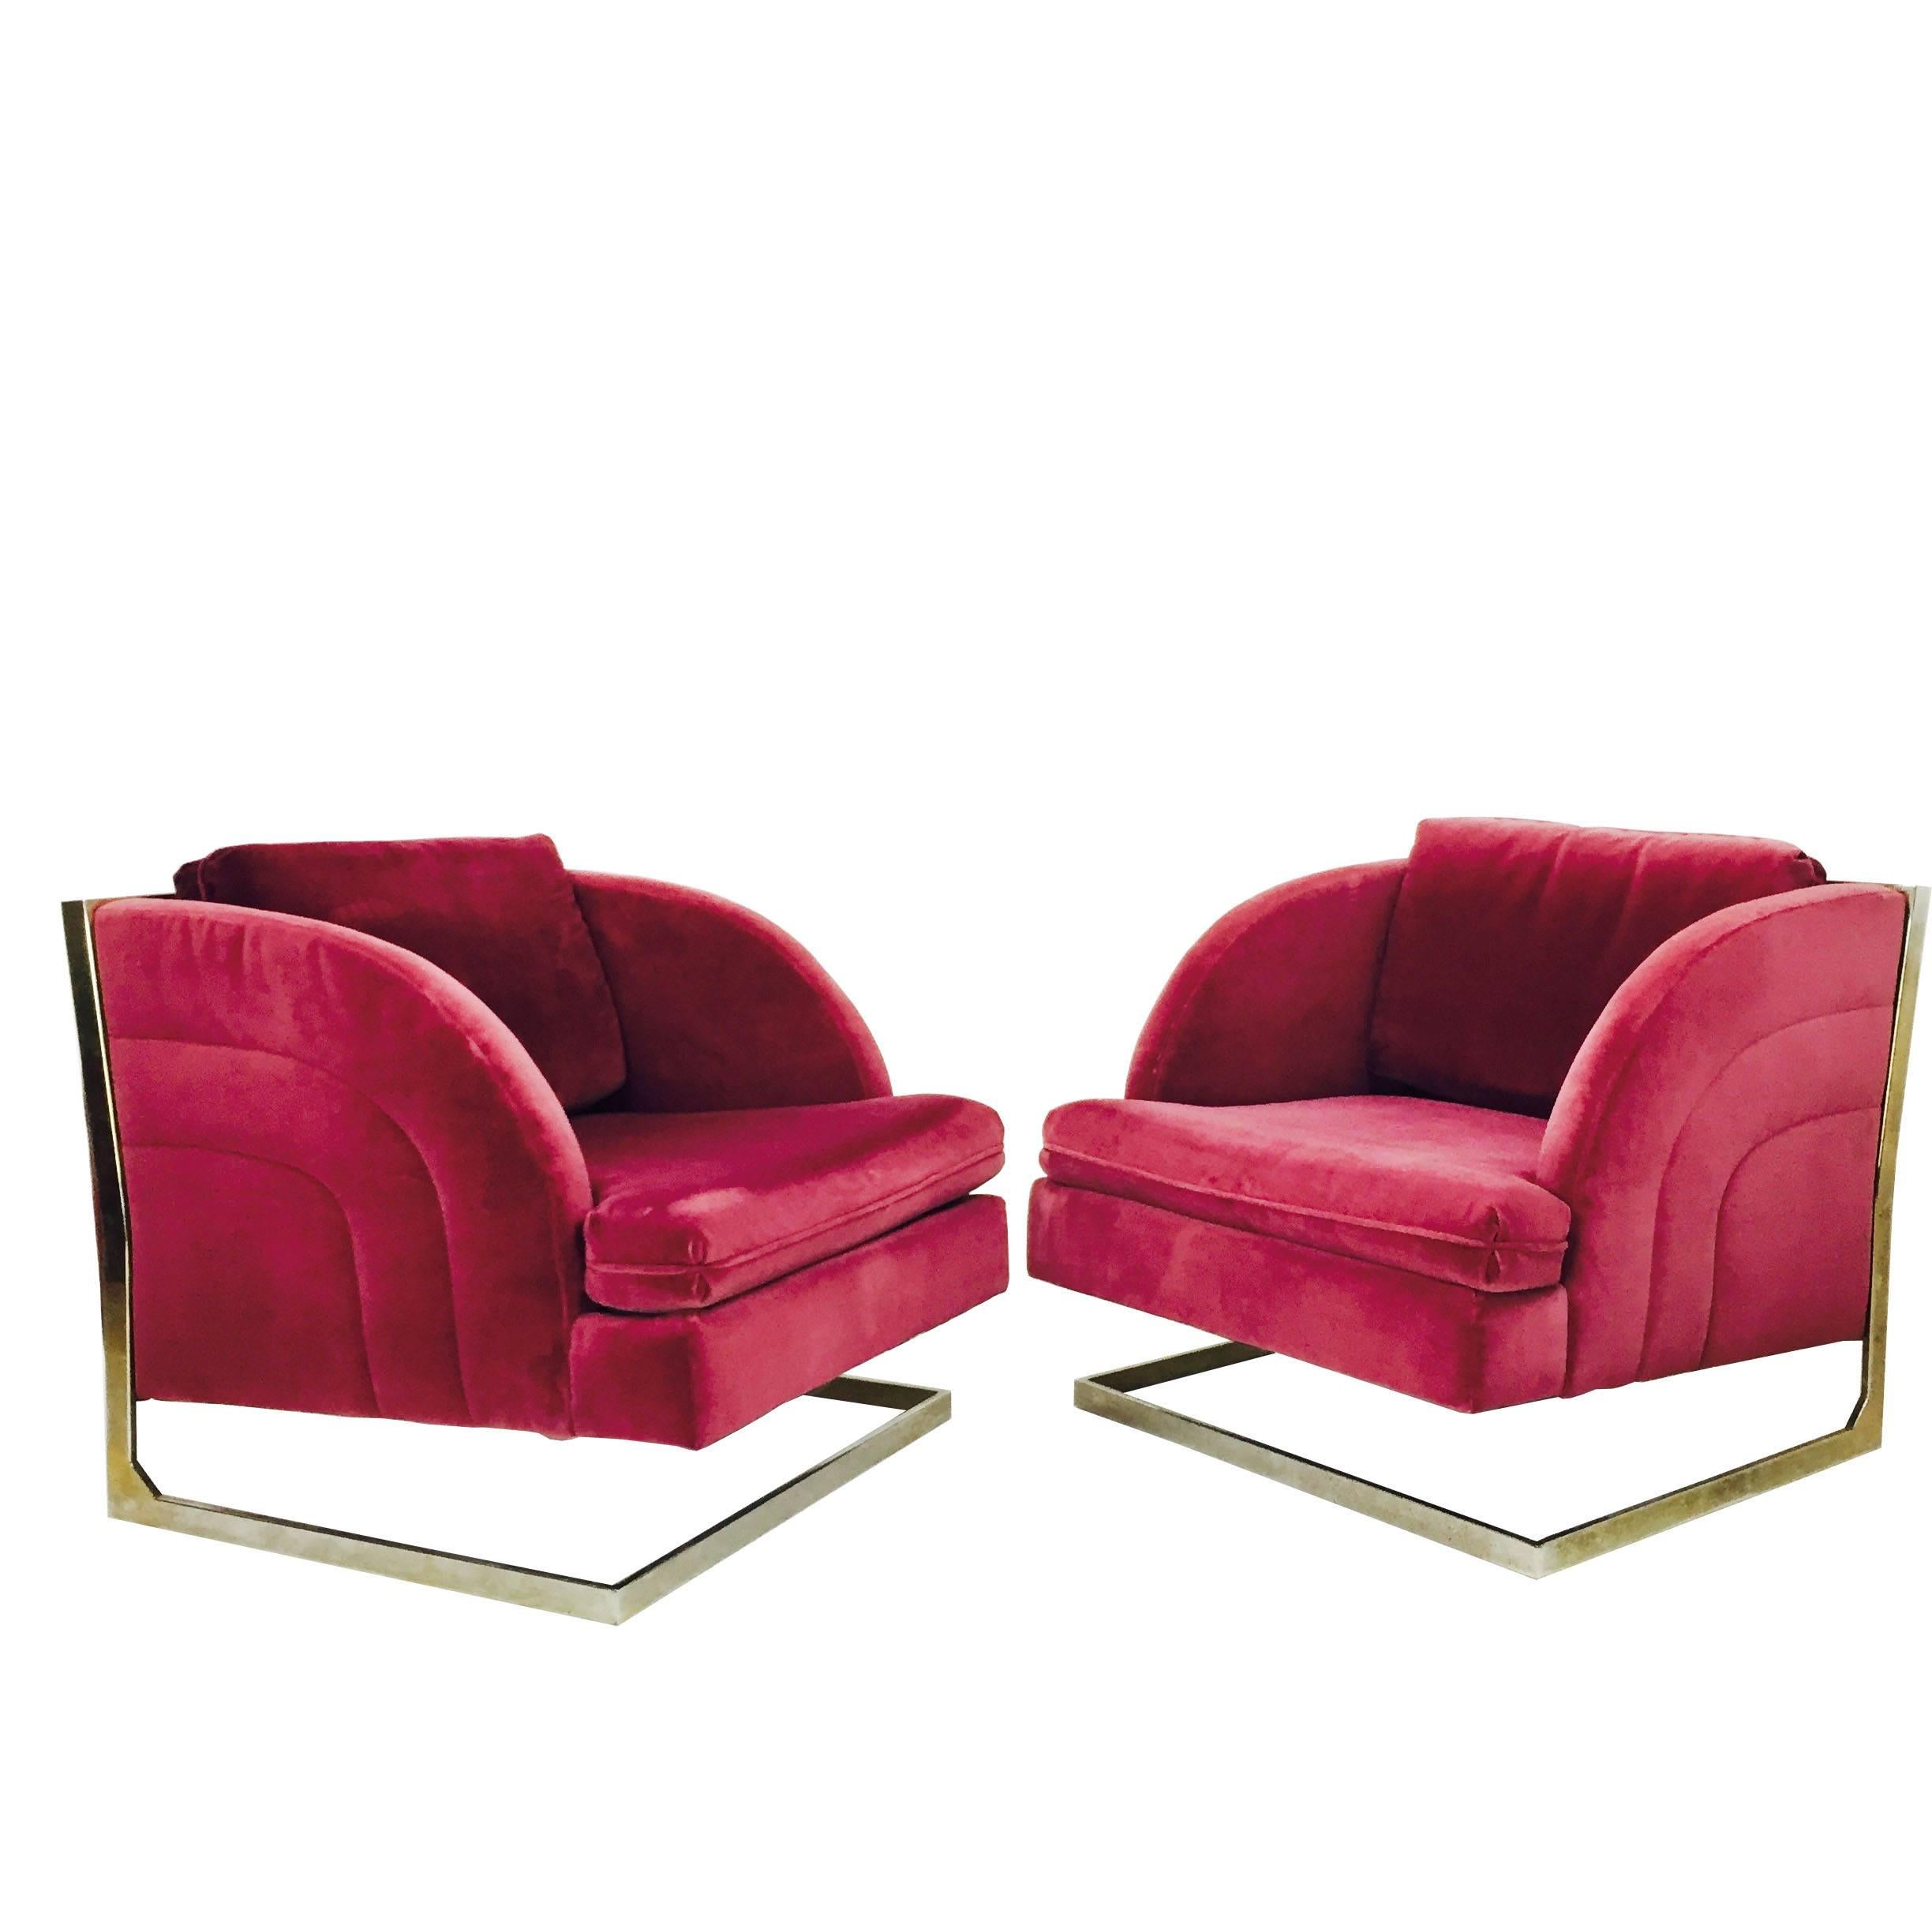 Pair of pink cantilever 1970s disco chairs in the style of Milo Baughman. 

Dimensions: 29" W x 34" D x 28" T
Seat height 17".